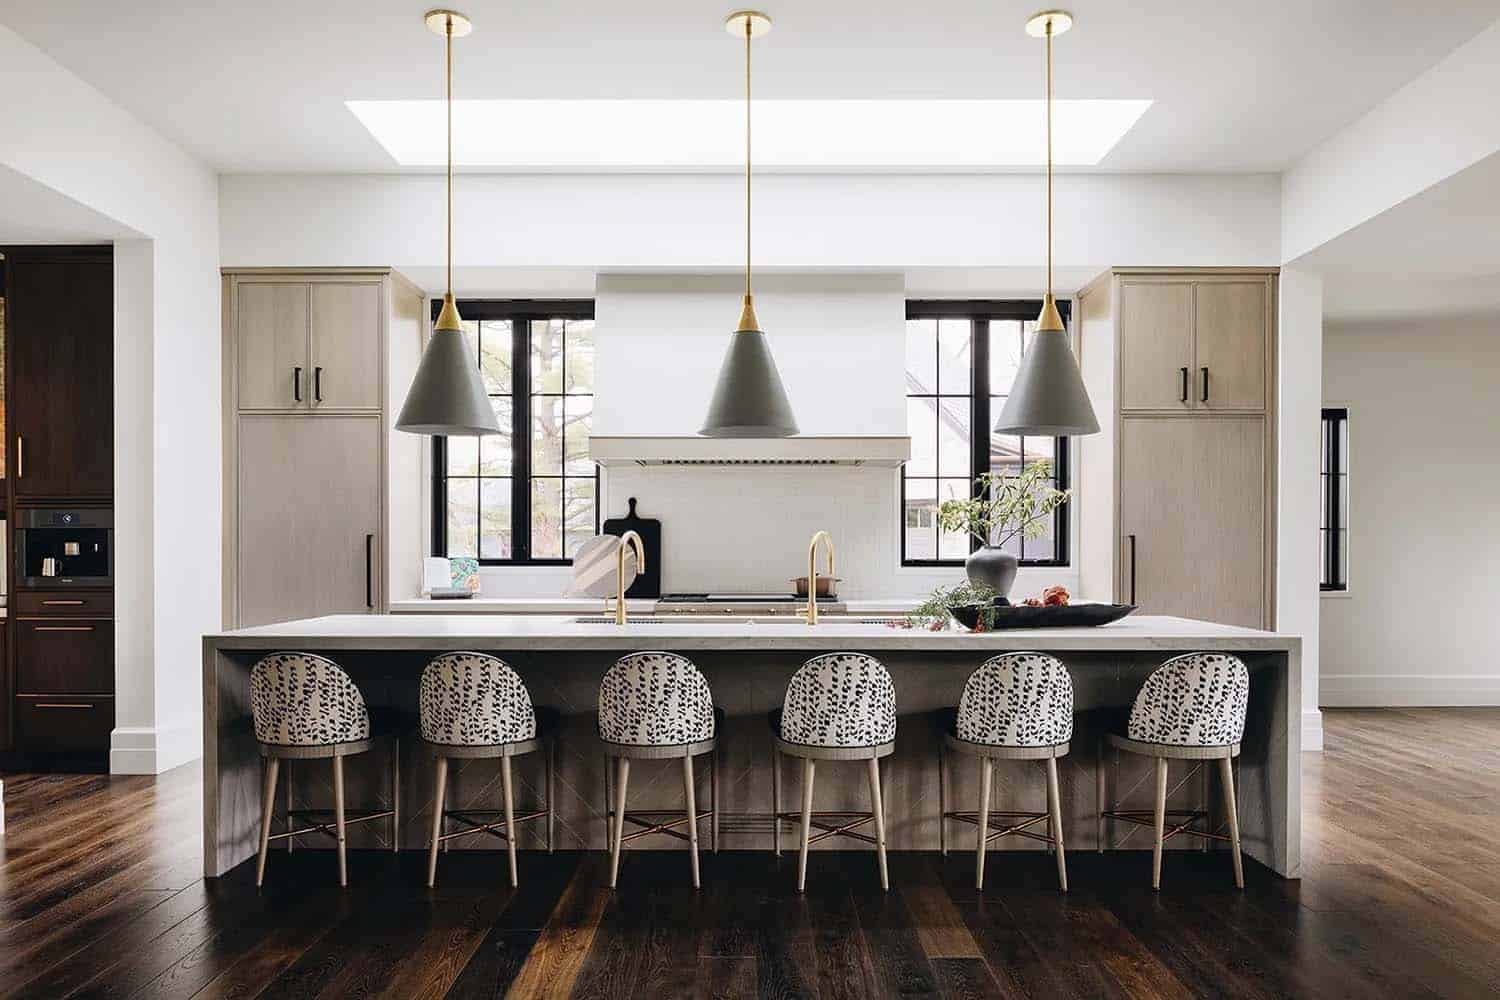 transitional style kitchen with a large island and pendant lights